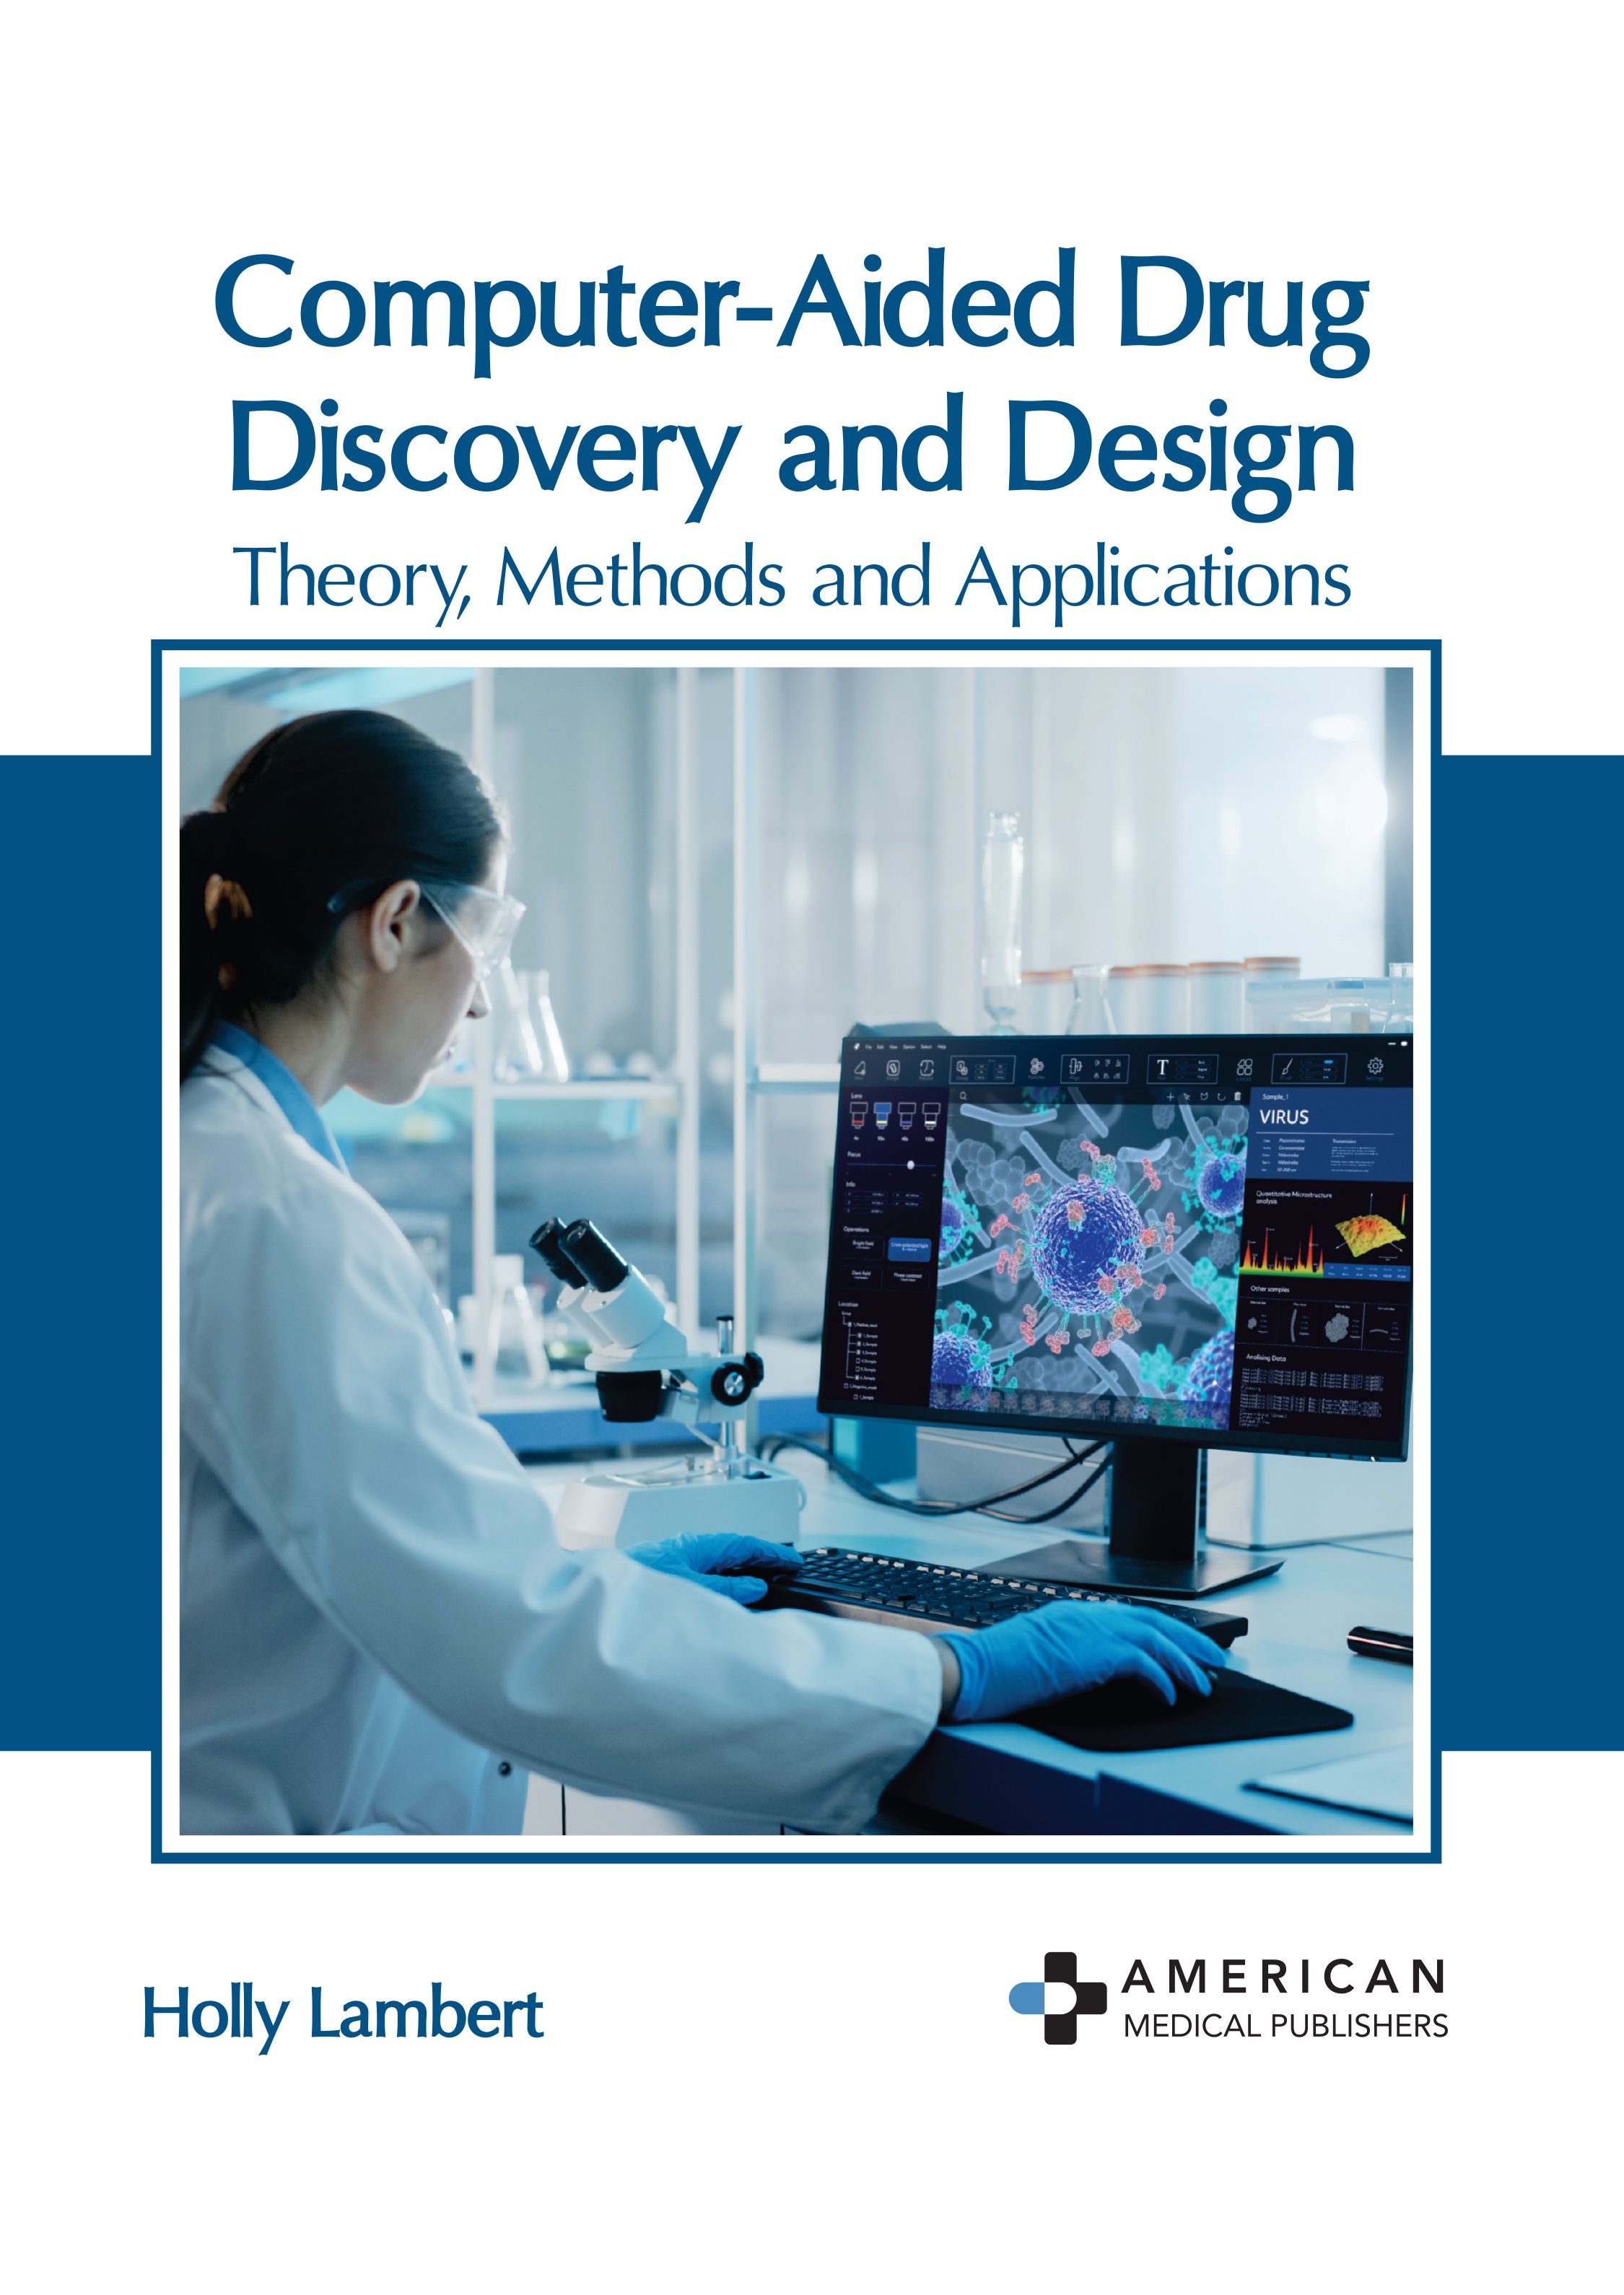 COMPUTER-AIDED DRUG DISCOVERY AND DESIGN: THEORY, METHODS AND APPLICATIONS 